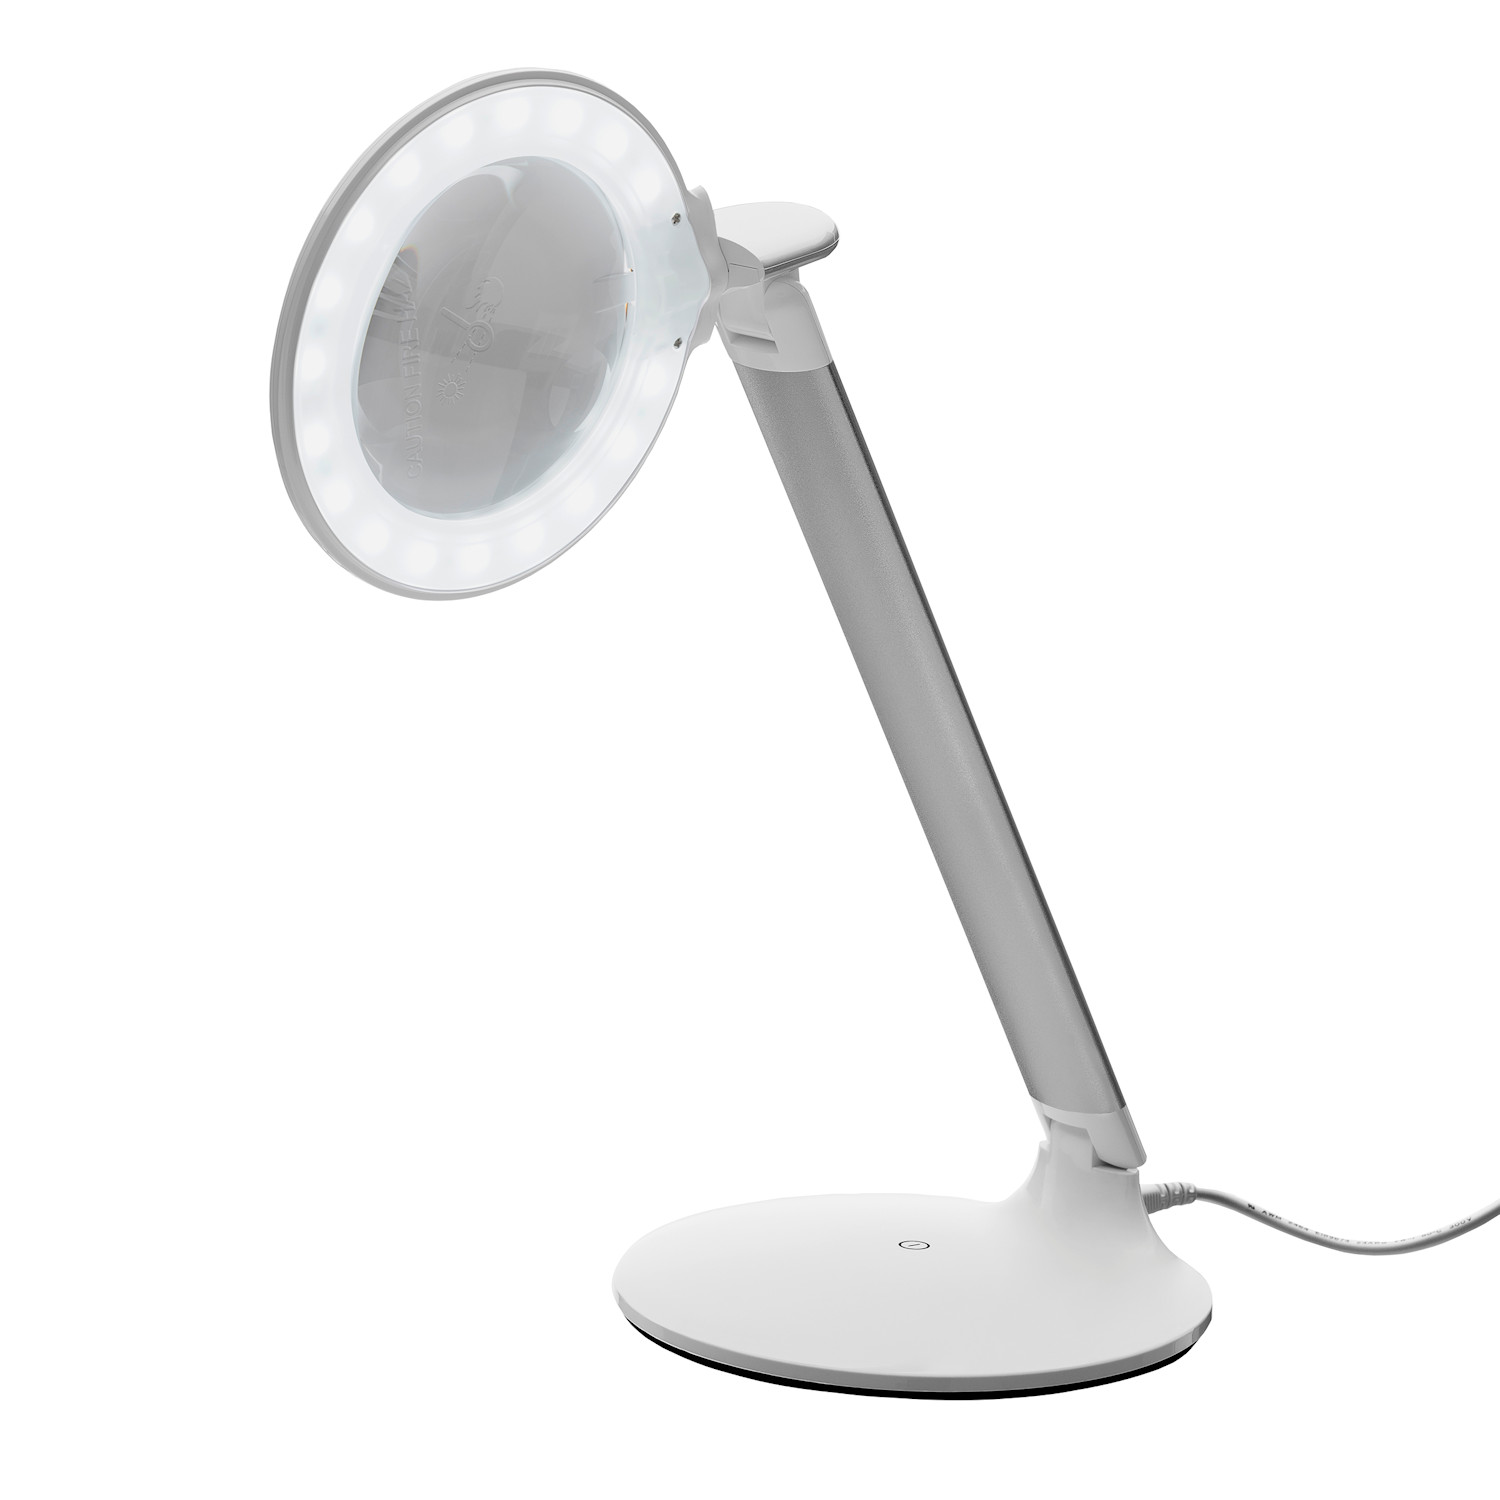 Daylight company Halo Table Magnifying Lamp